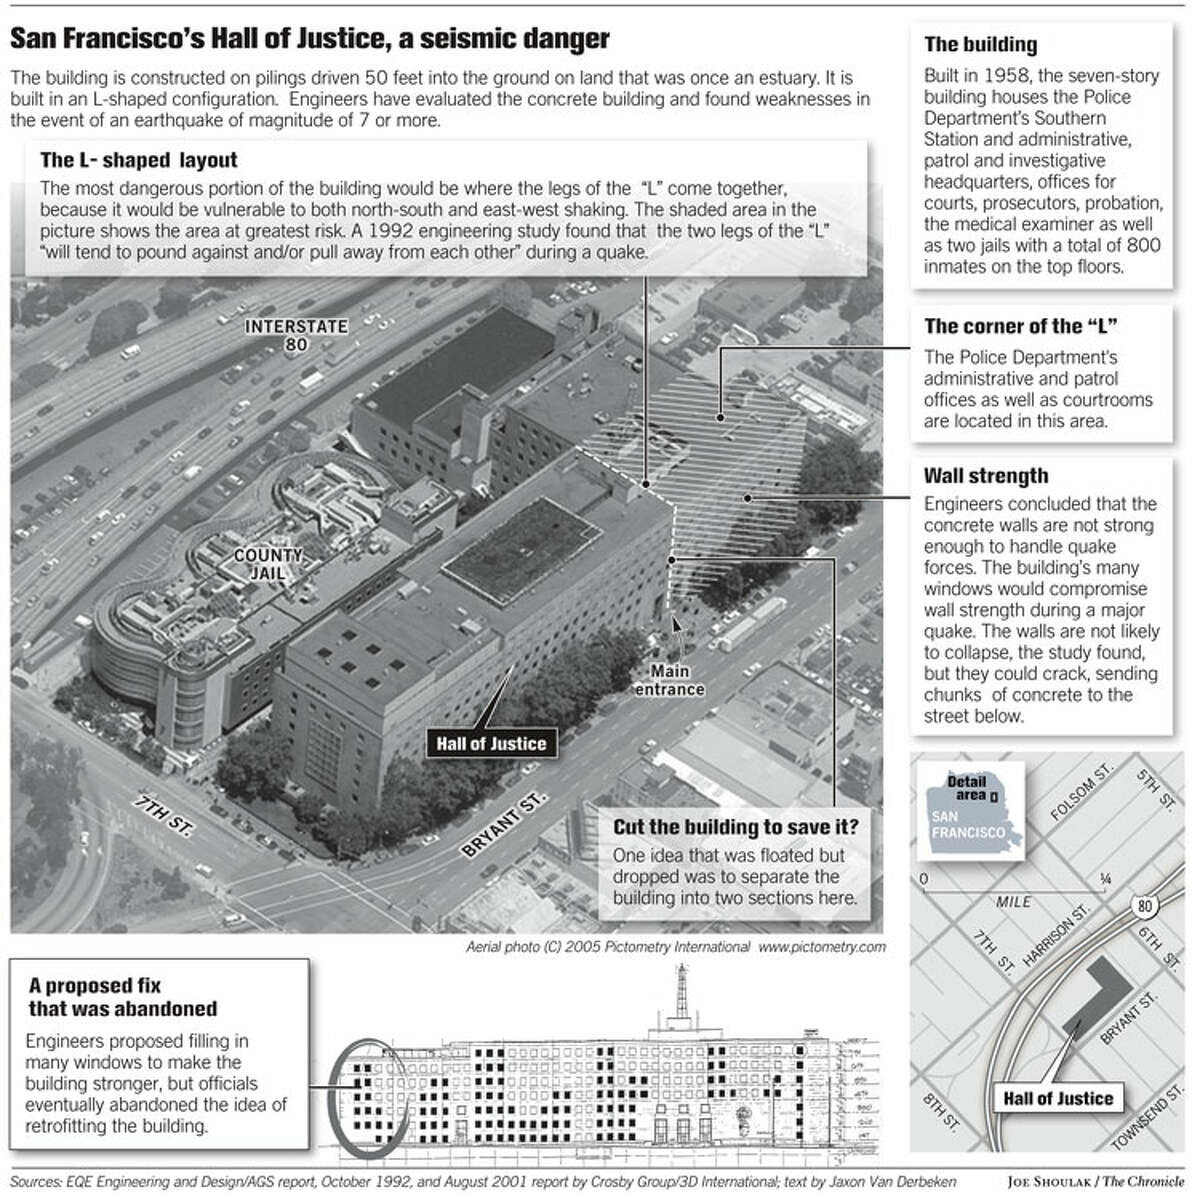 San Francisco's Hall of Justice, a seismic danger. Chronicle graphic by Joe Shoulak